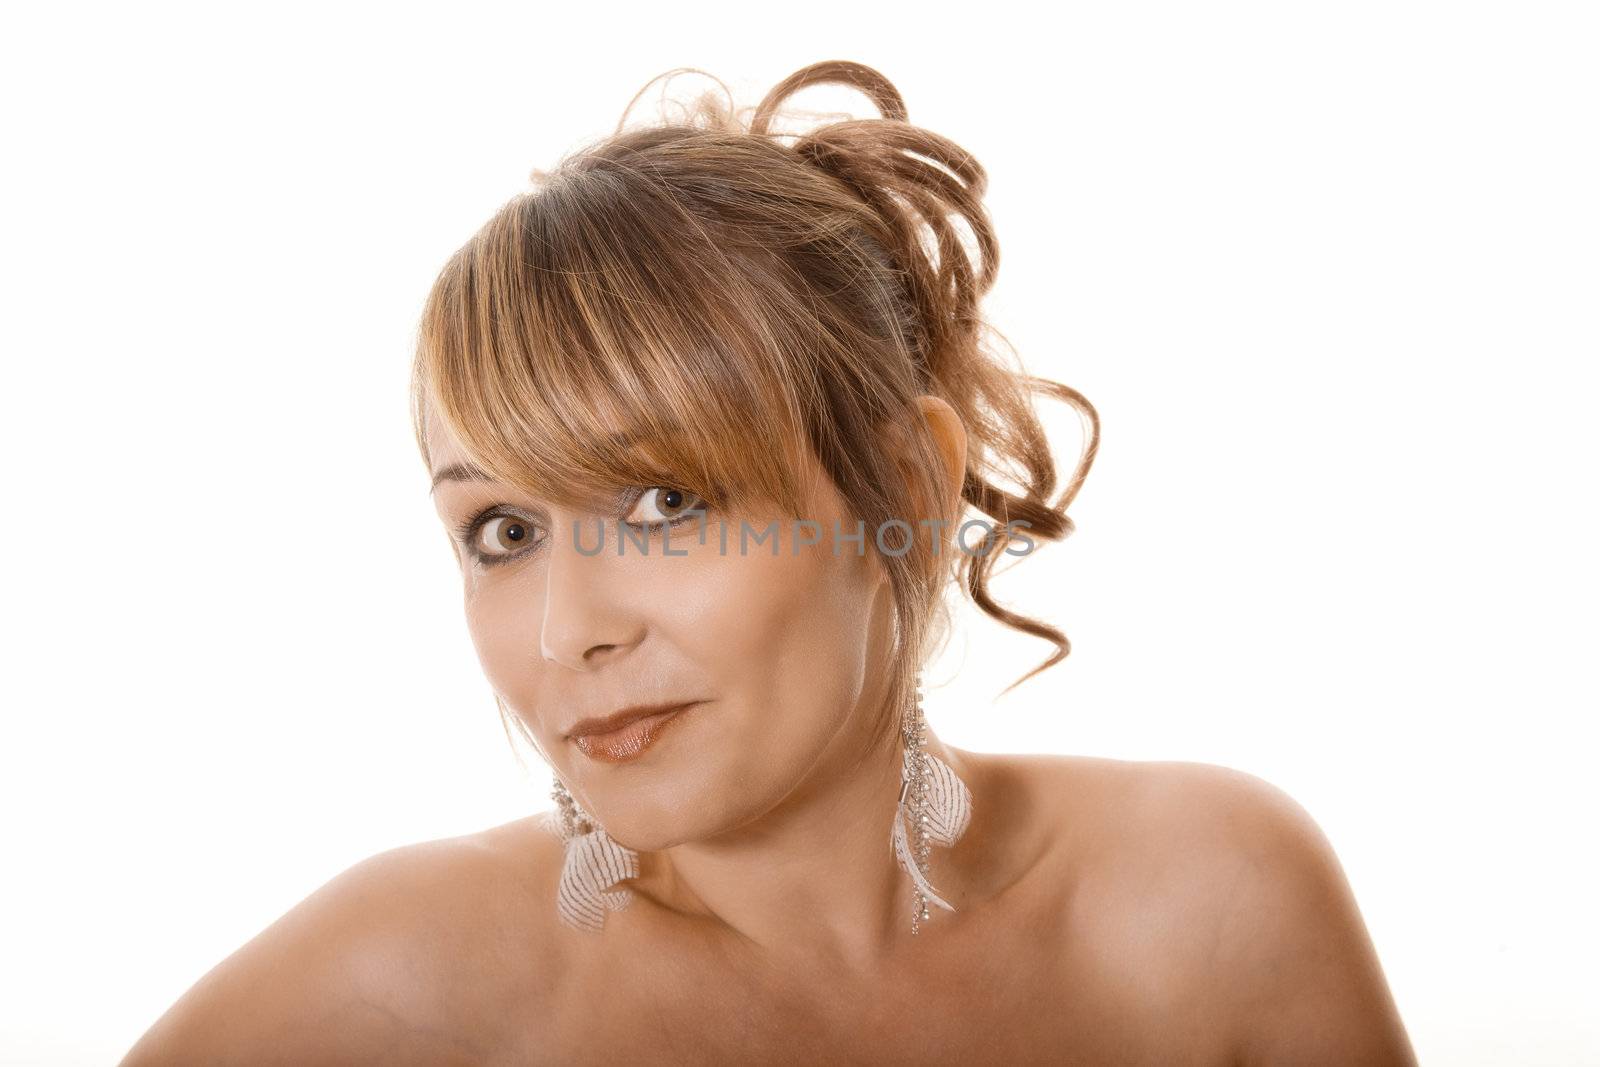 Portrait of woman looking wide eyed at camera isolated on white